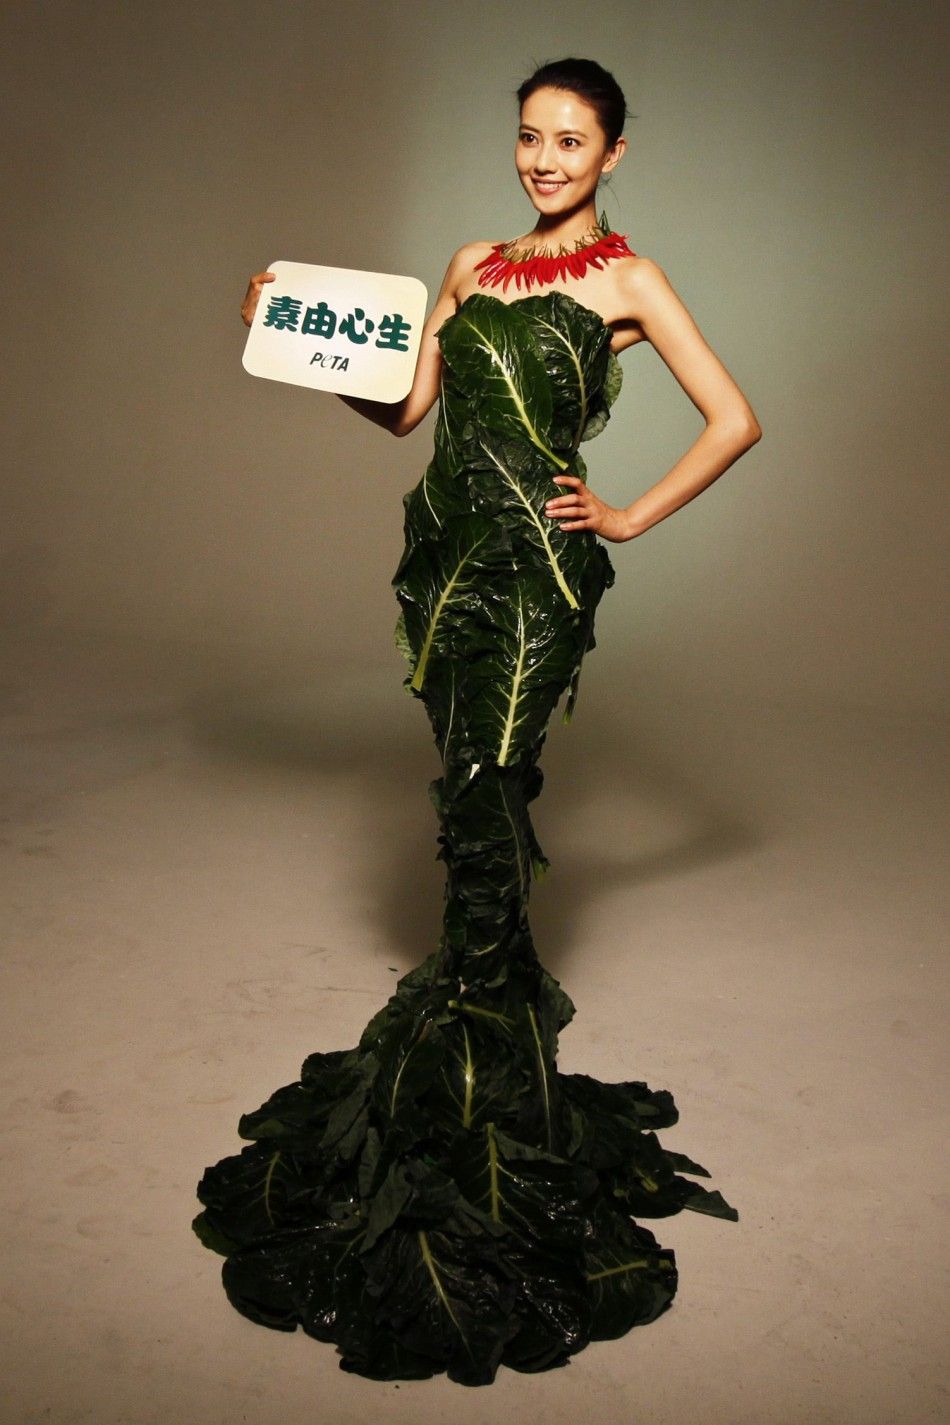 Chinese movie star Gao poses in a gown made of lettuce and cabbage leaves during an event organized by PETA in Beijing